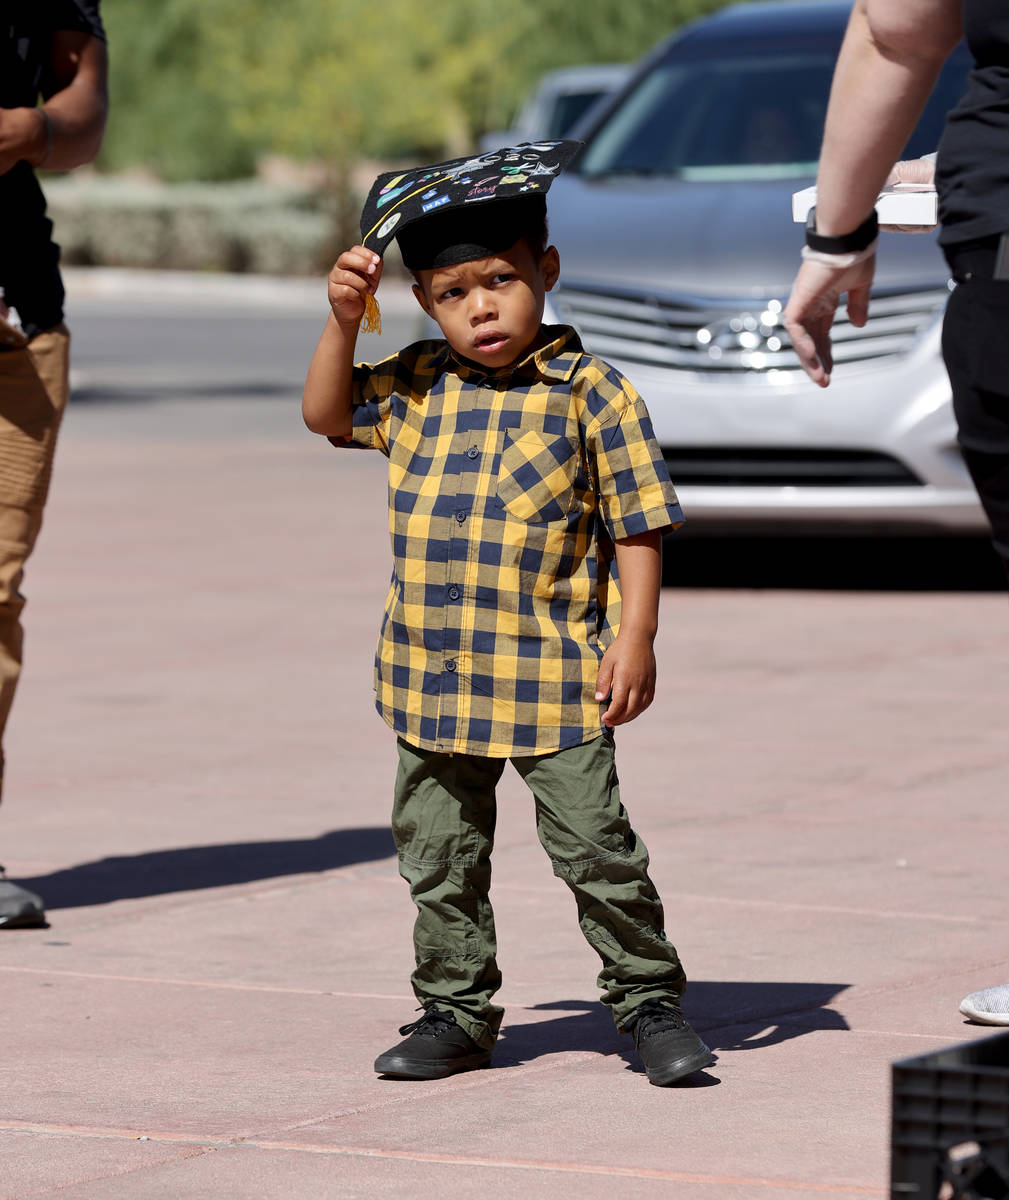 Shaddai Hayes Jr. 4, during drive-thru graduation for preschoolers at SkyView YMCA in Las Vegas ...